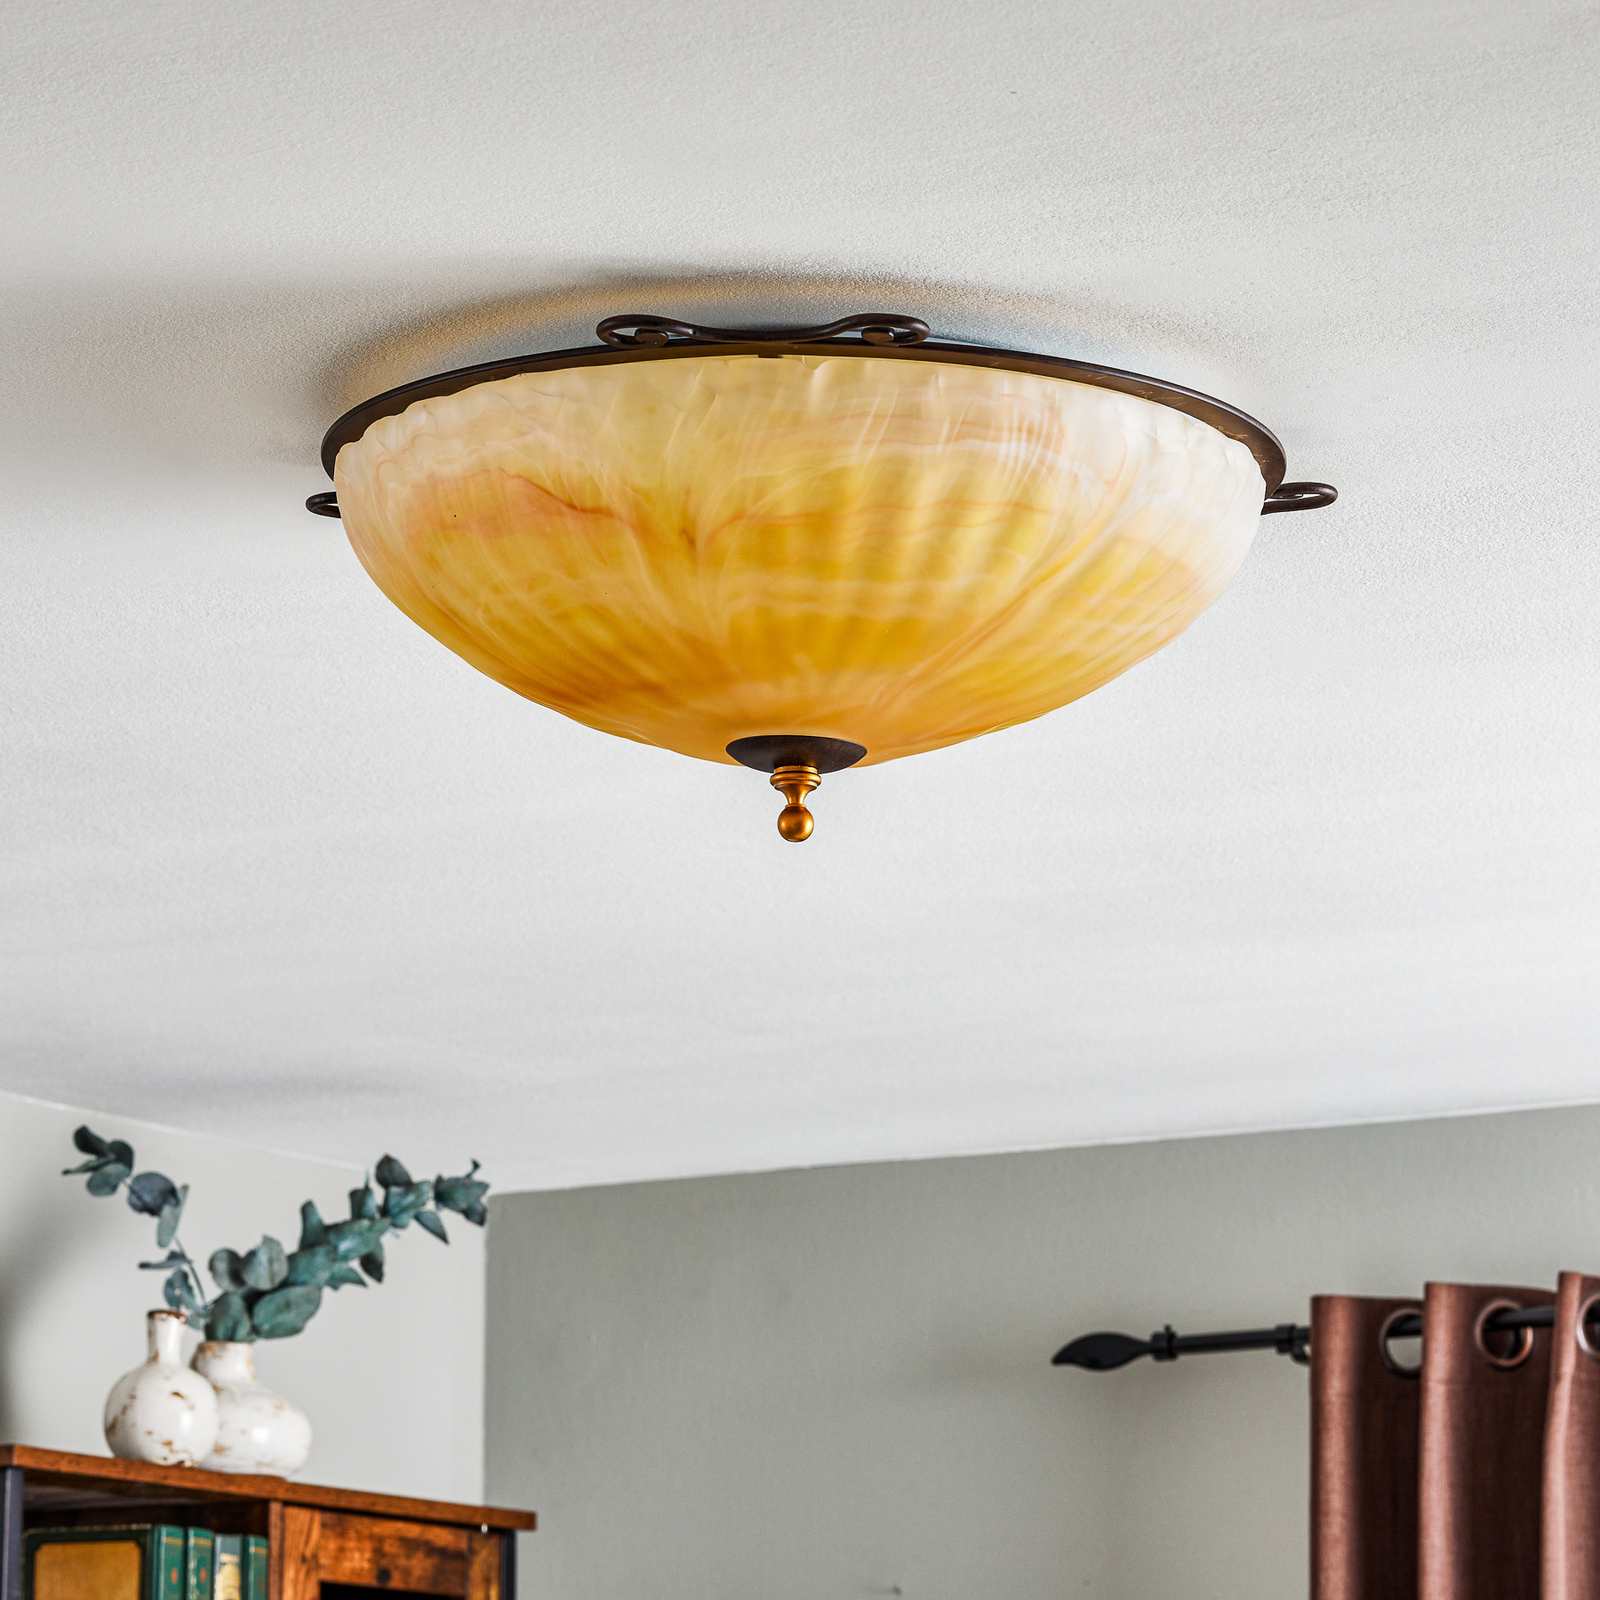 With an antique style - ceiling light Armelle